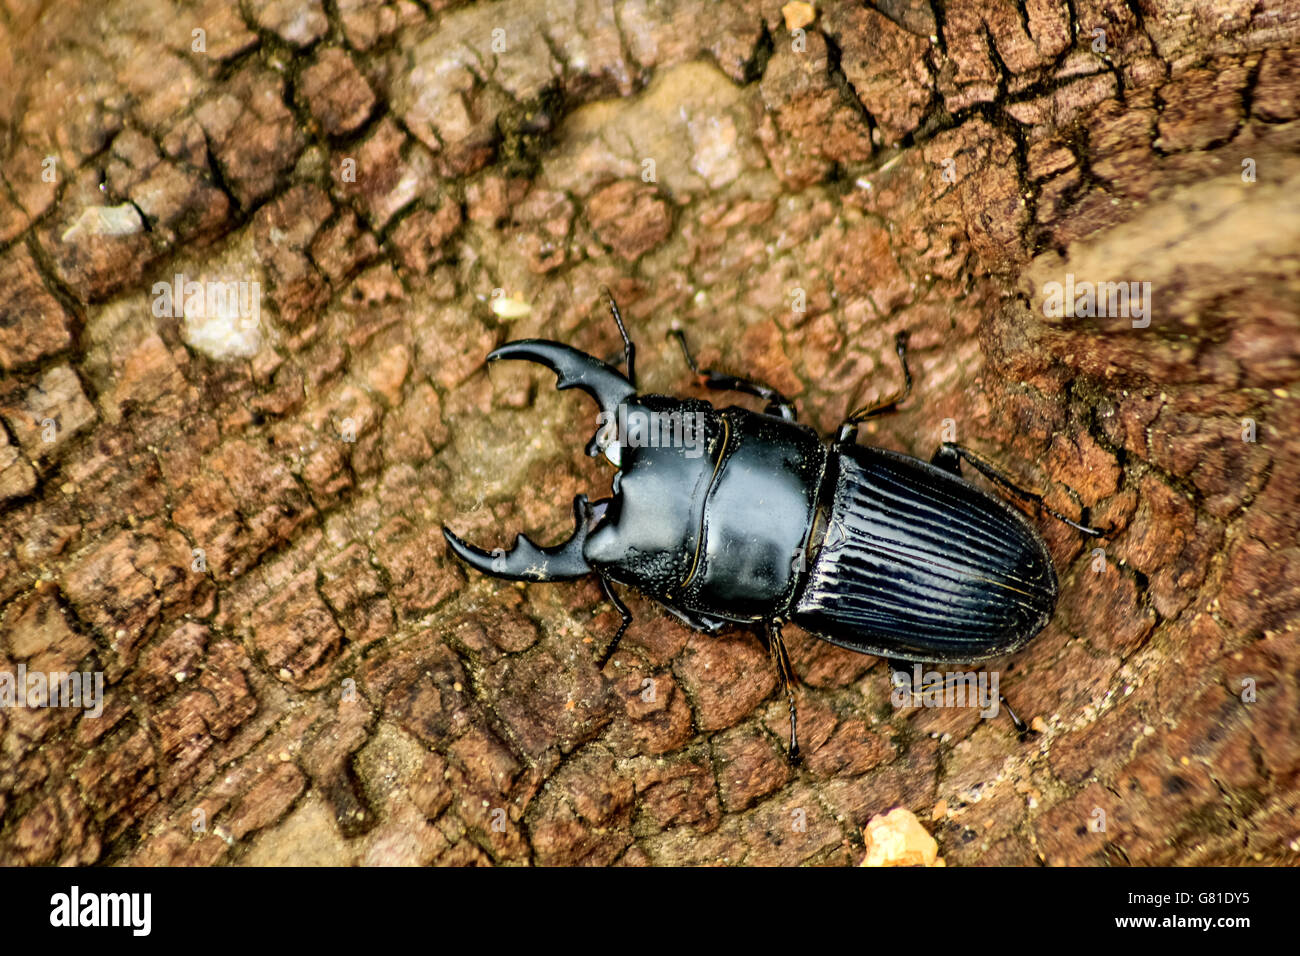 Macro image of a stag beetle Stock Photo